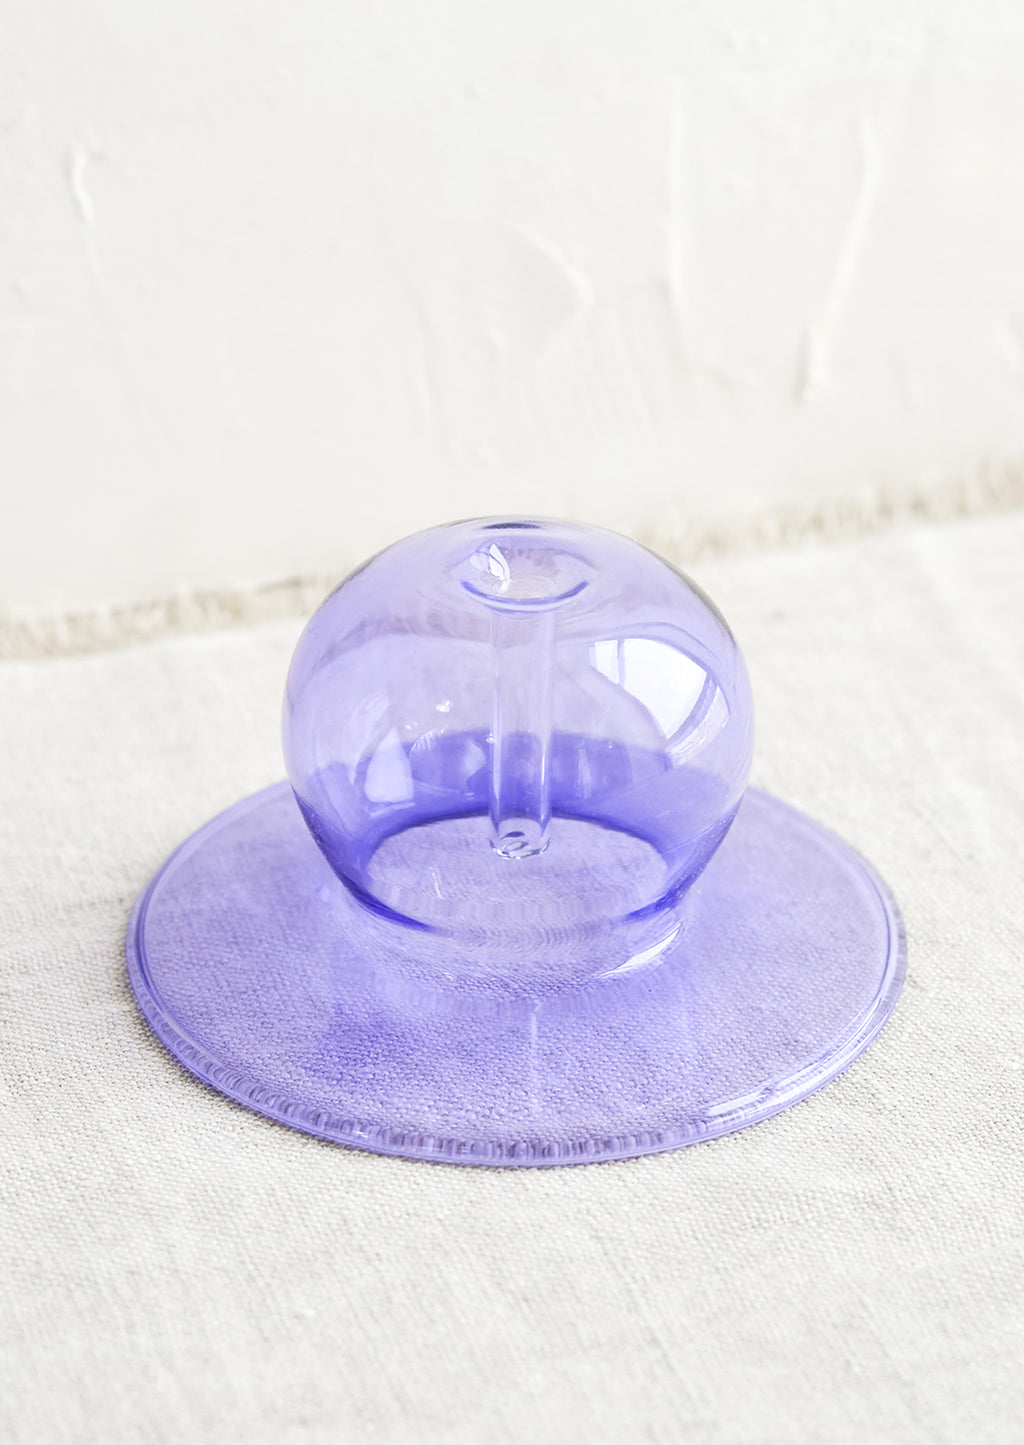 Lavender: A purple bubble shaped glass form designed to hold stick incense.